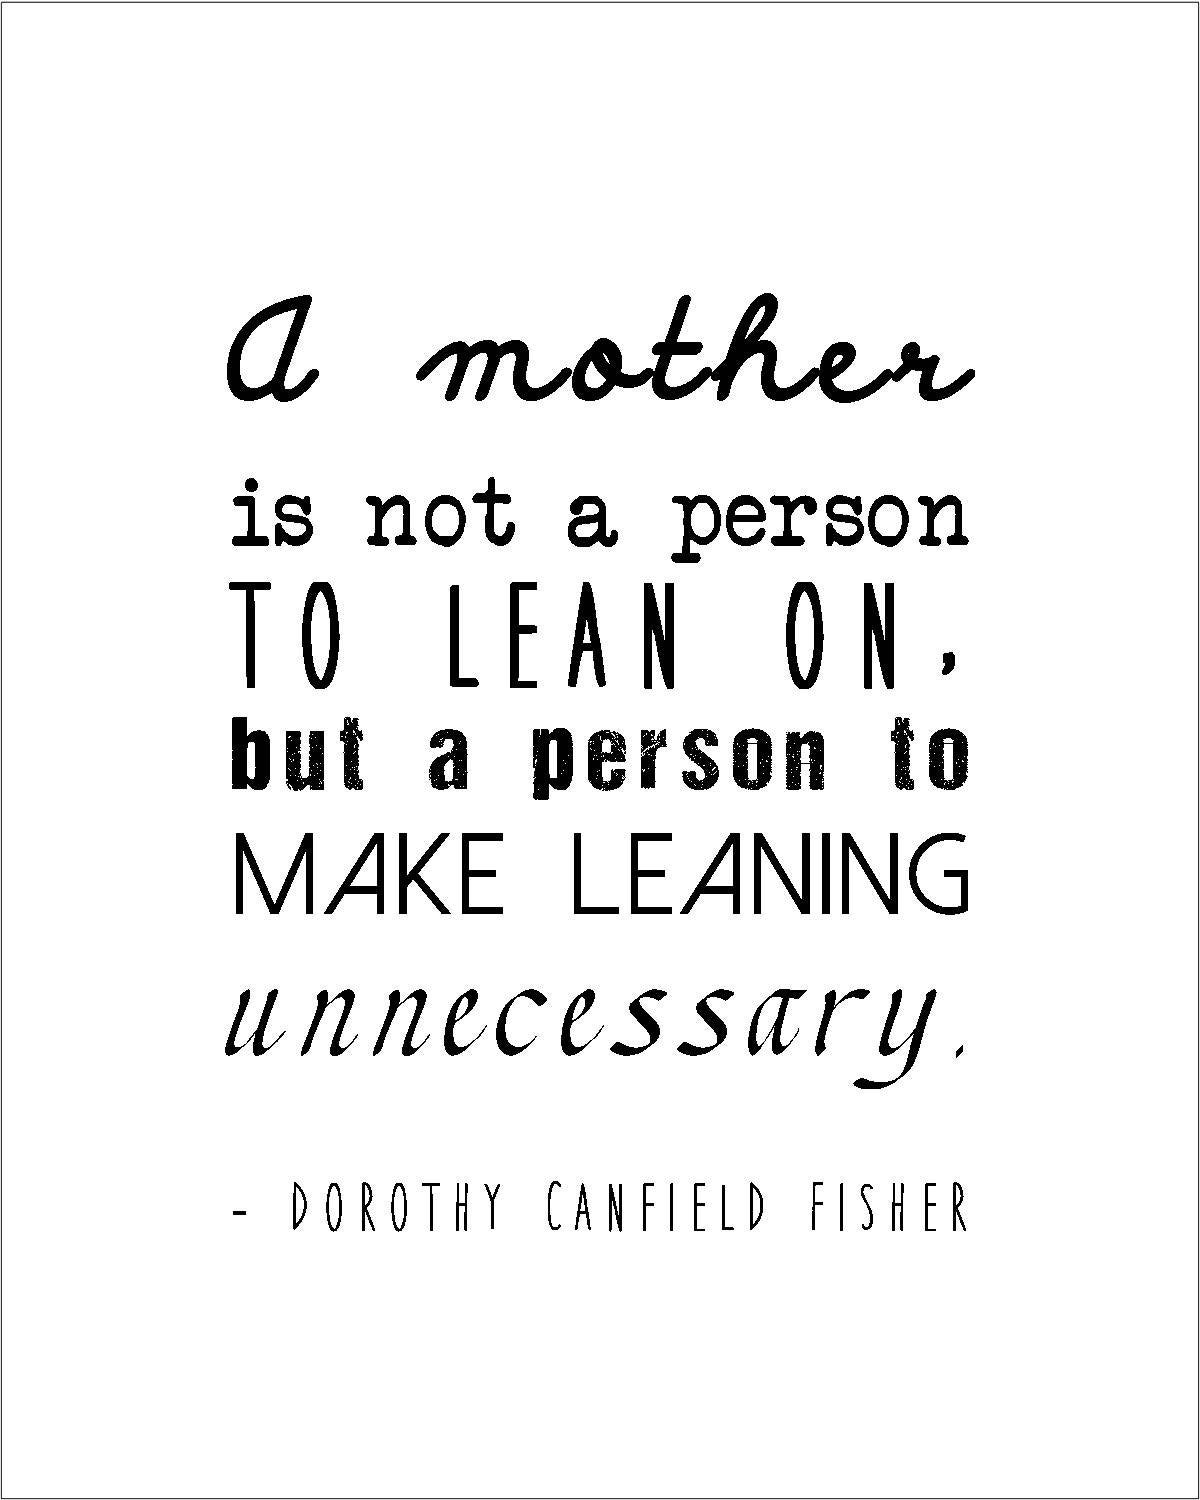 Mother's Day quote life wisdom encouragement motivation